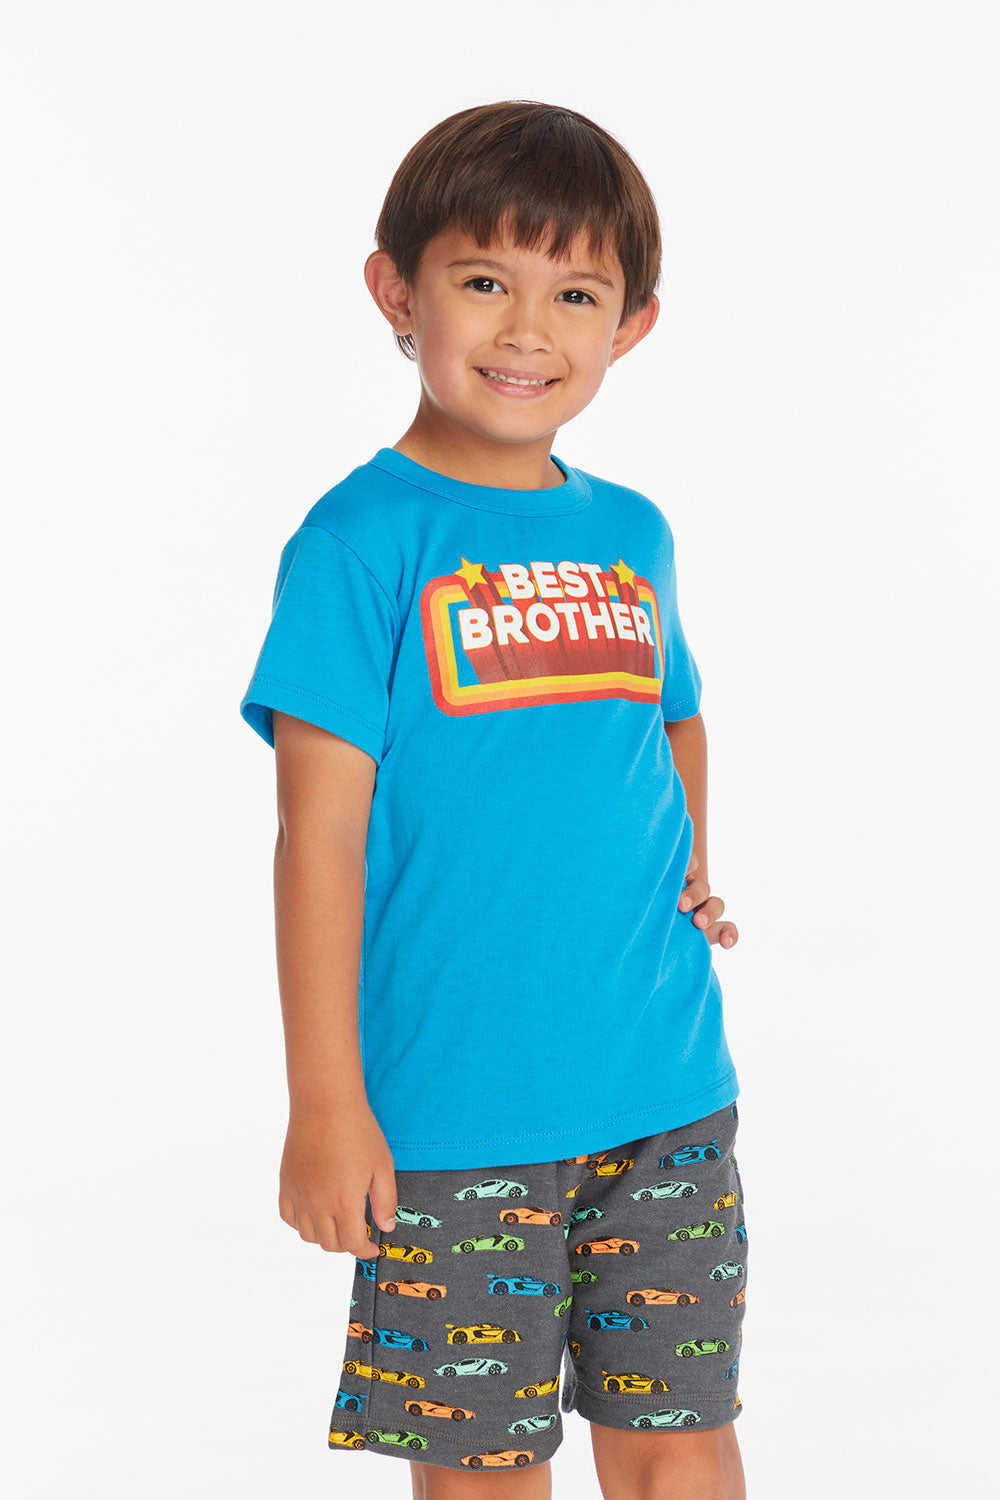 Best Brother Boys Tee Boys chaserbrand